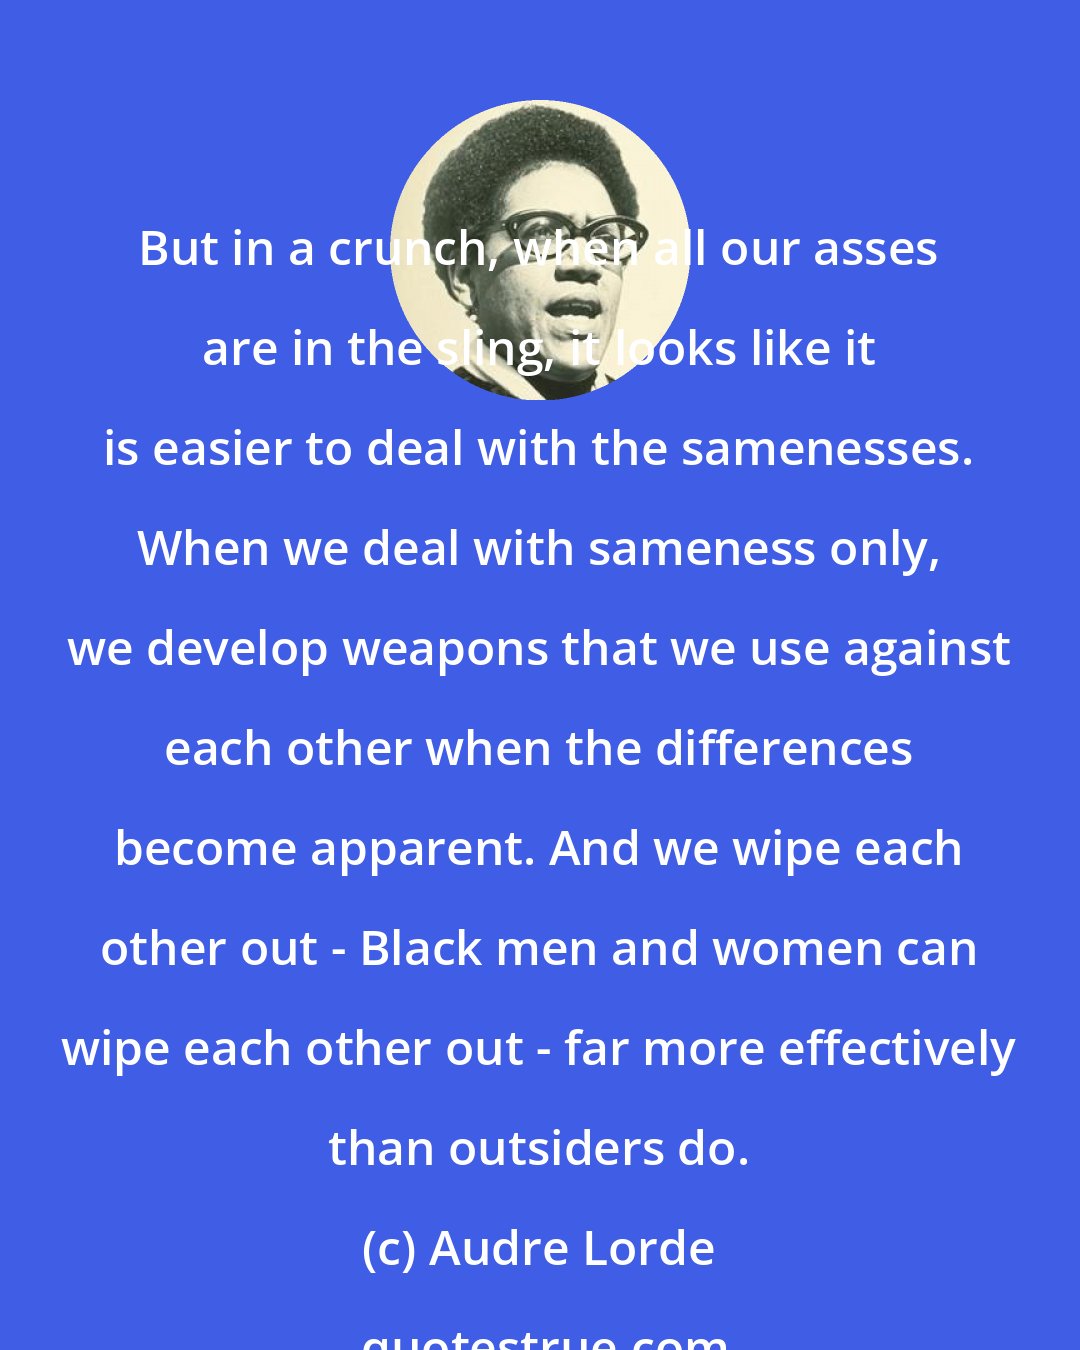 Audre Lorde: But in a crunch, when all our asses are in the sling, it looks like it is easier to deal with the samenesses. When we deal with sameness only, we develop weapons that we use against each other when the differences become apparent. And we wipe each other out - Black men and women can wipe each other out - far more effectively than outsiders do.